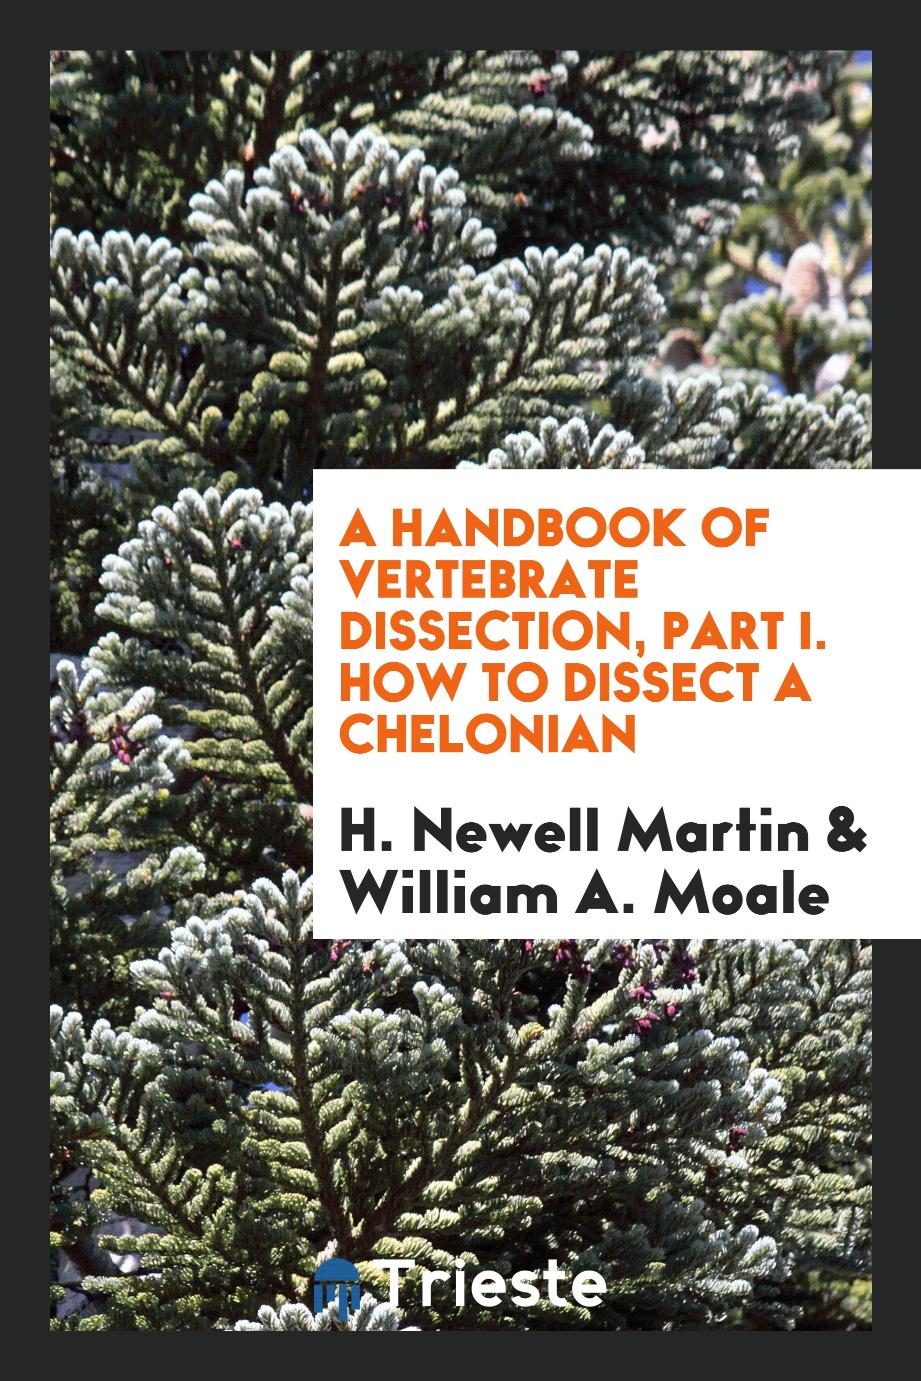 A Handbook of Vertebrate Dissection, Part I. How to Dissect a Chelonian